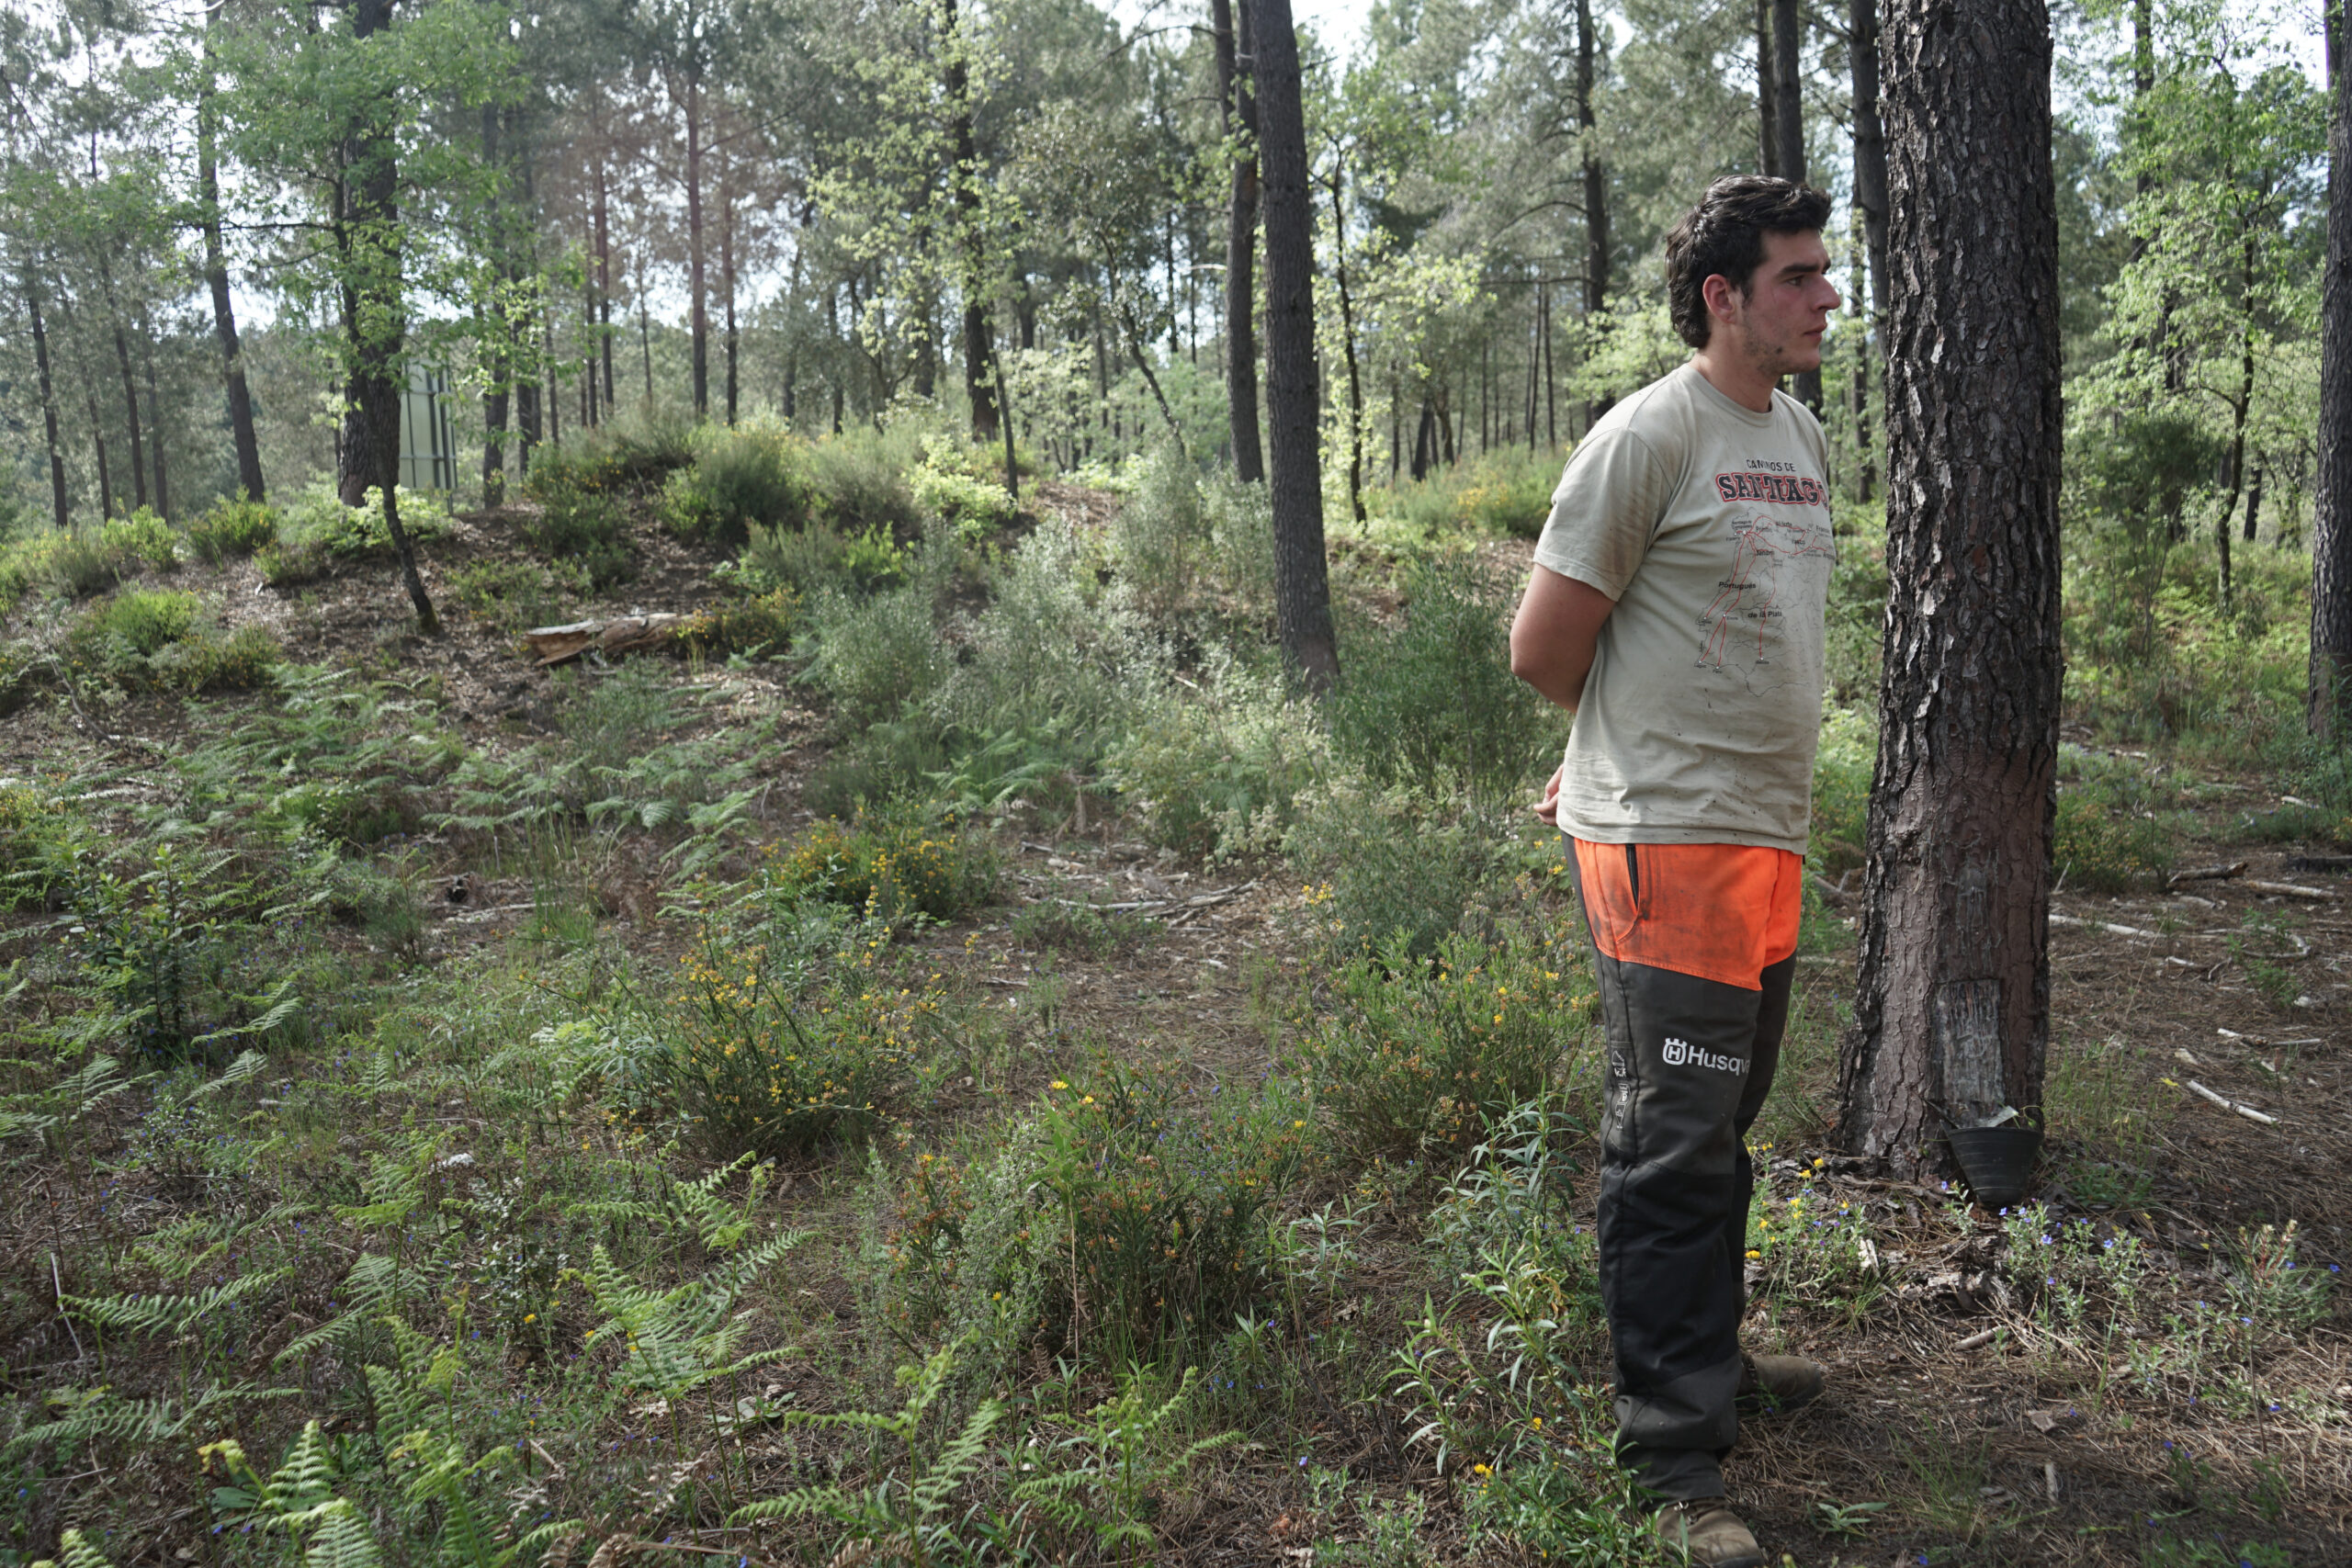 Javier Calzada during an interview at his pine grove in Extremadura, Spain.